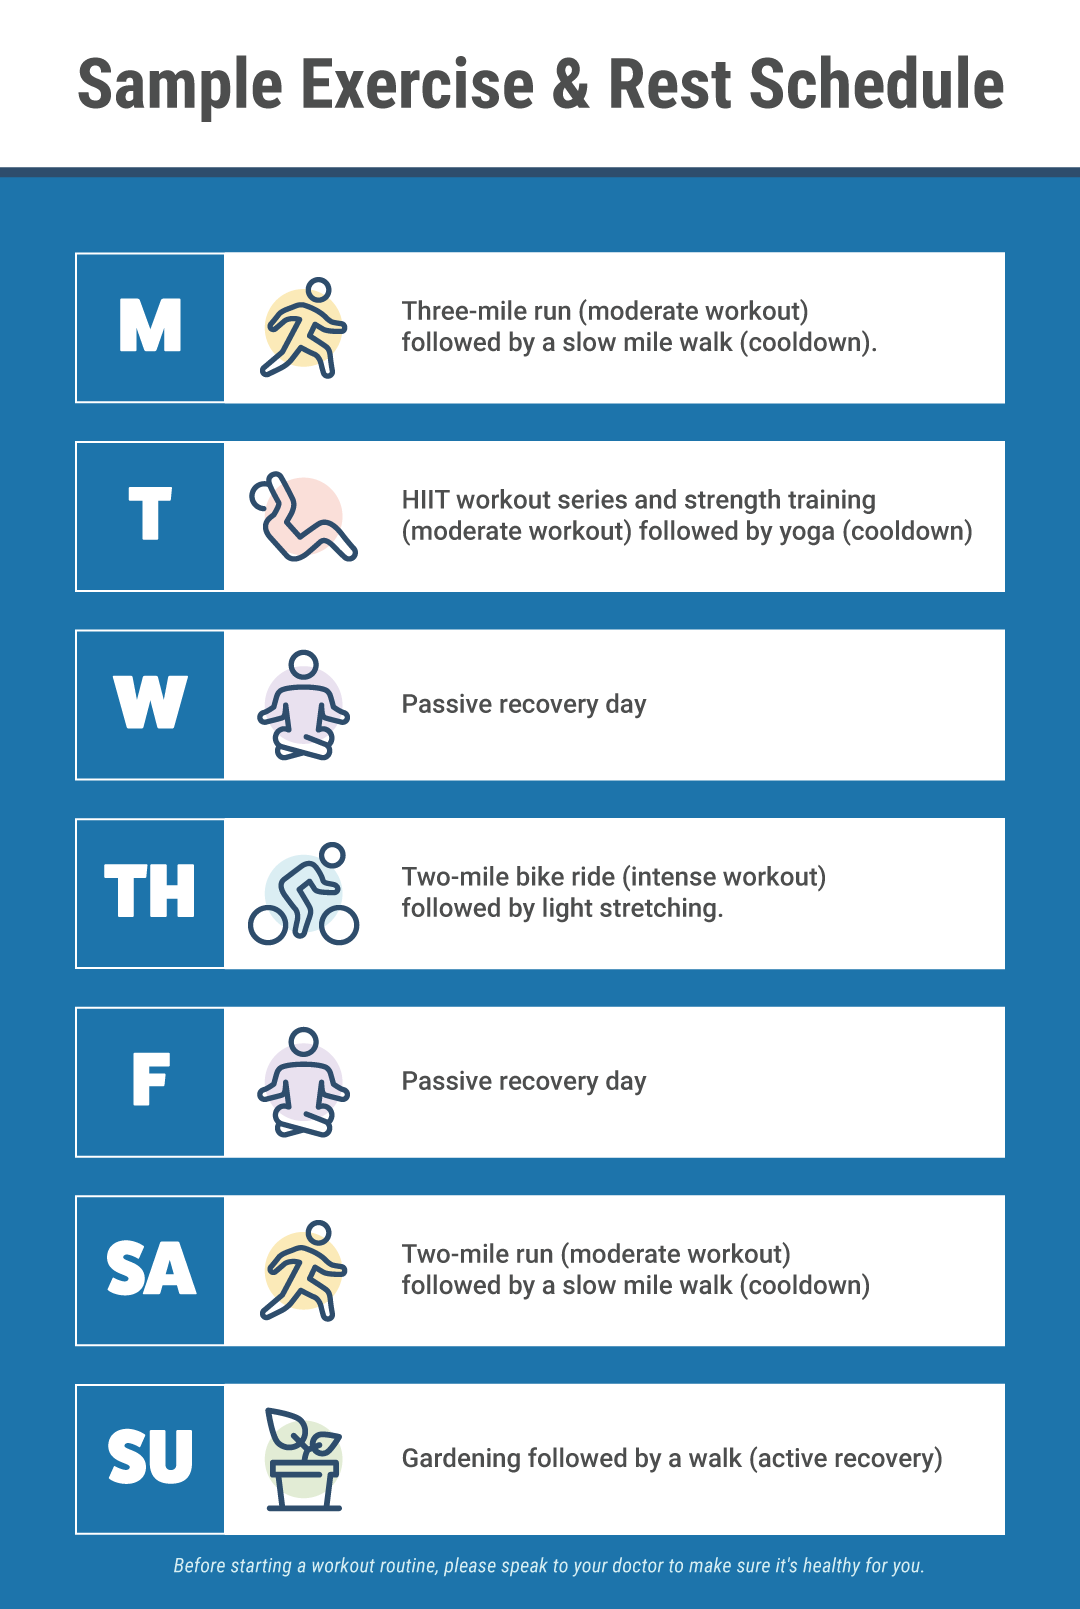 Active recovery: How it works, exercises, benefits, and precautions